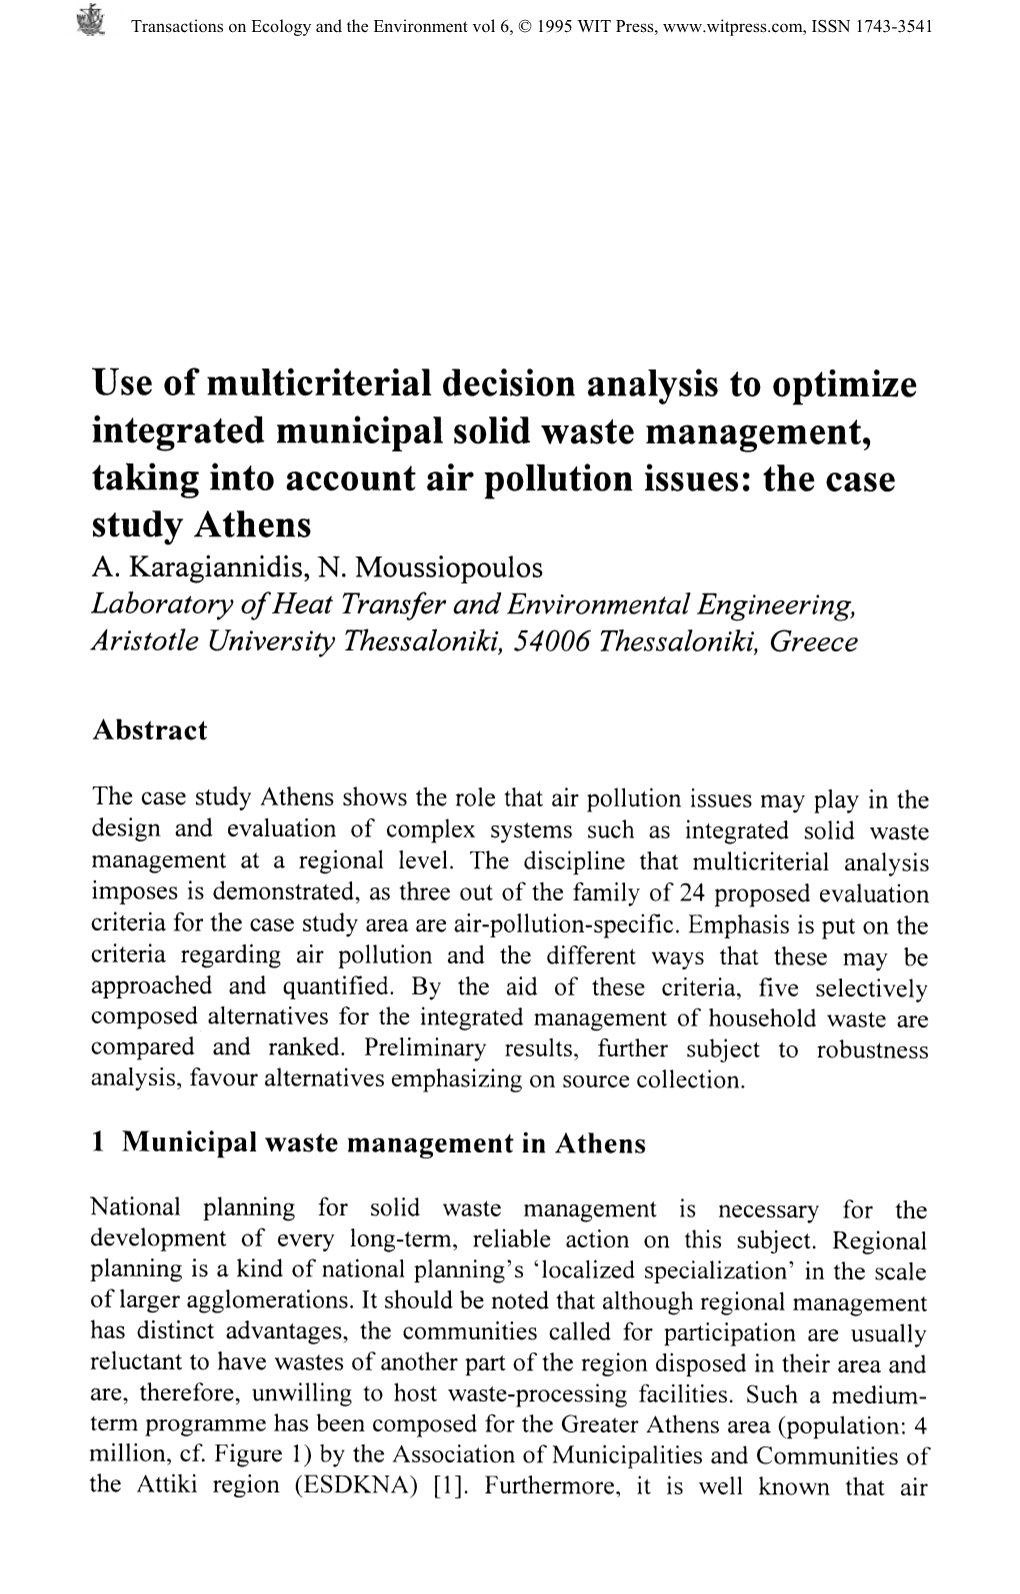 Use of Multicriterial Decision Analysis to Optimize Integrated Municipal Solid Waste Management, Taking Into Account Air Pollution Issues: the Case Study Athens